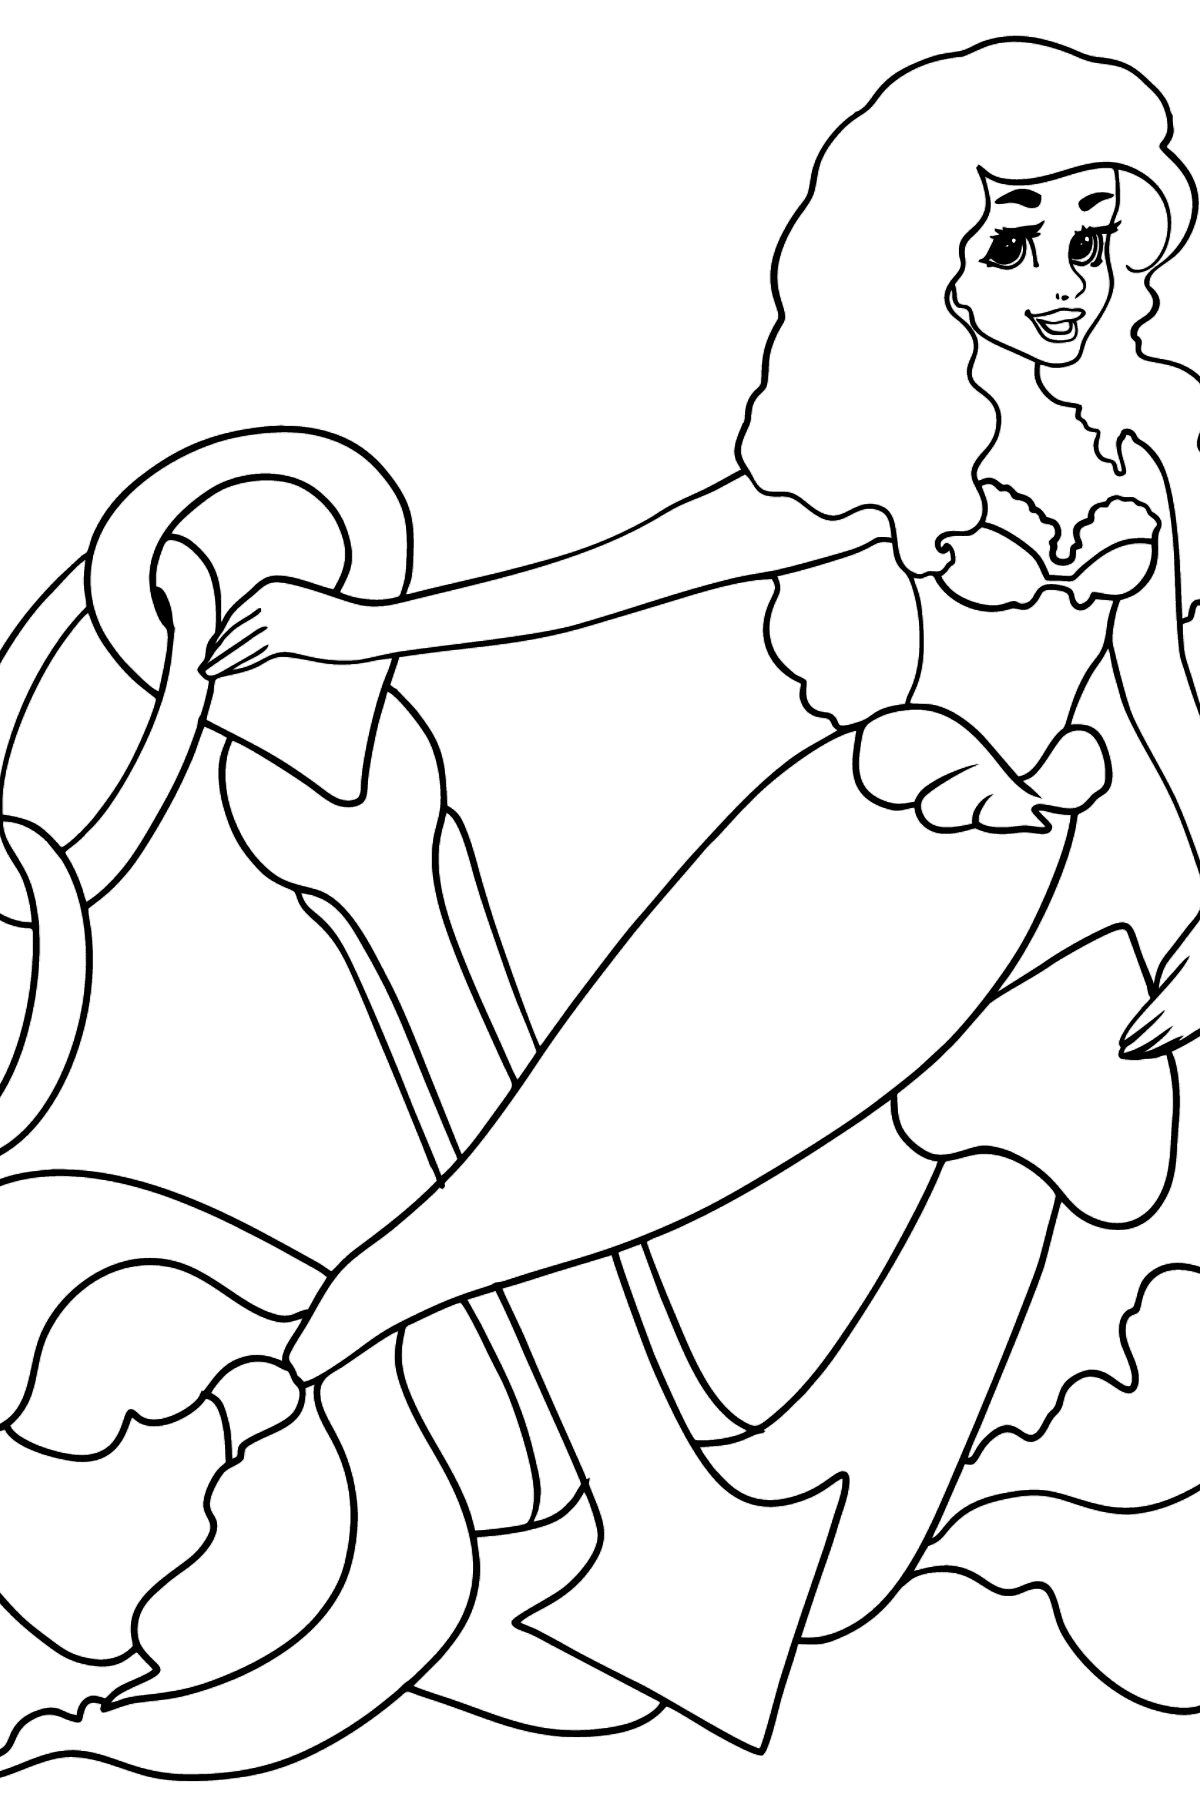 Coloring Page Mermaid and Anchor - Coloring Pages for Kids